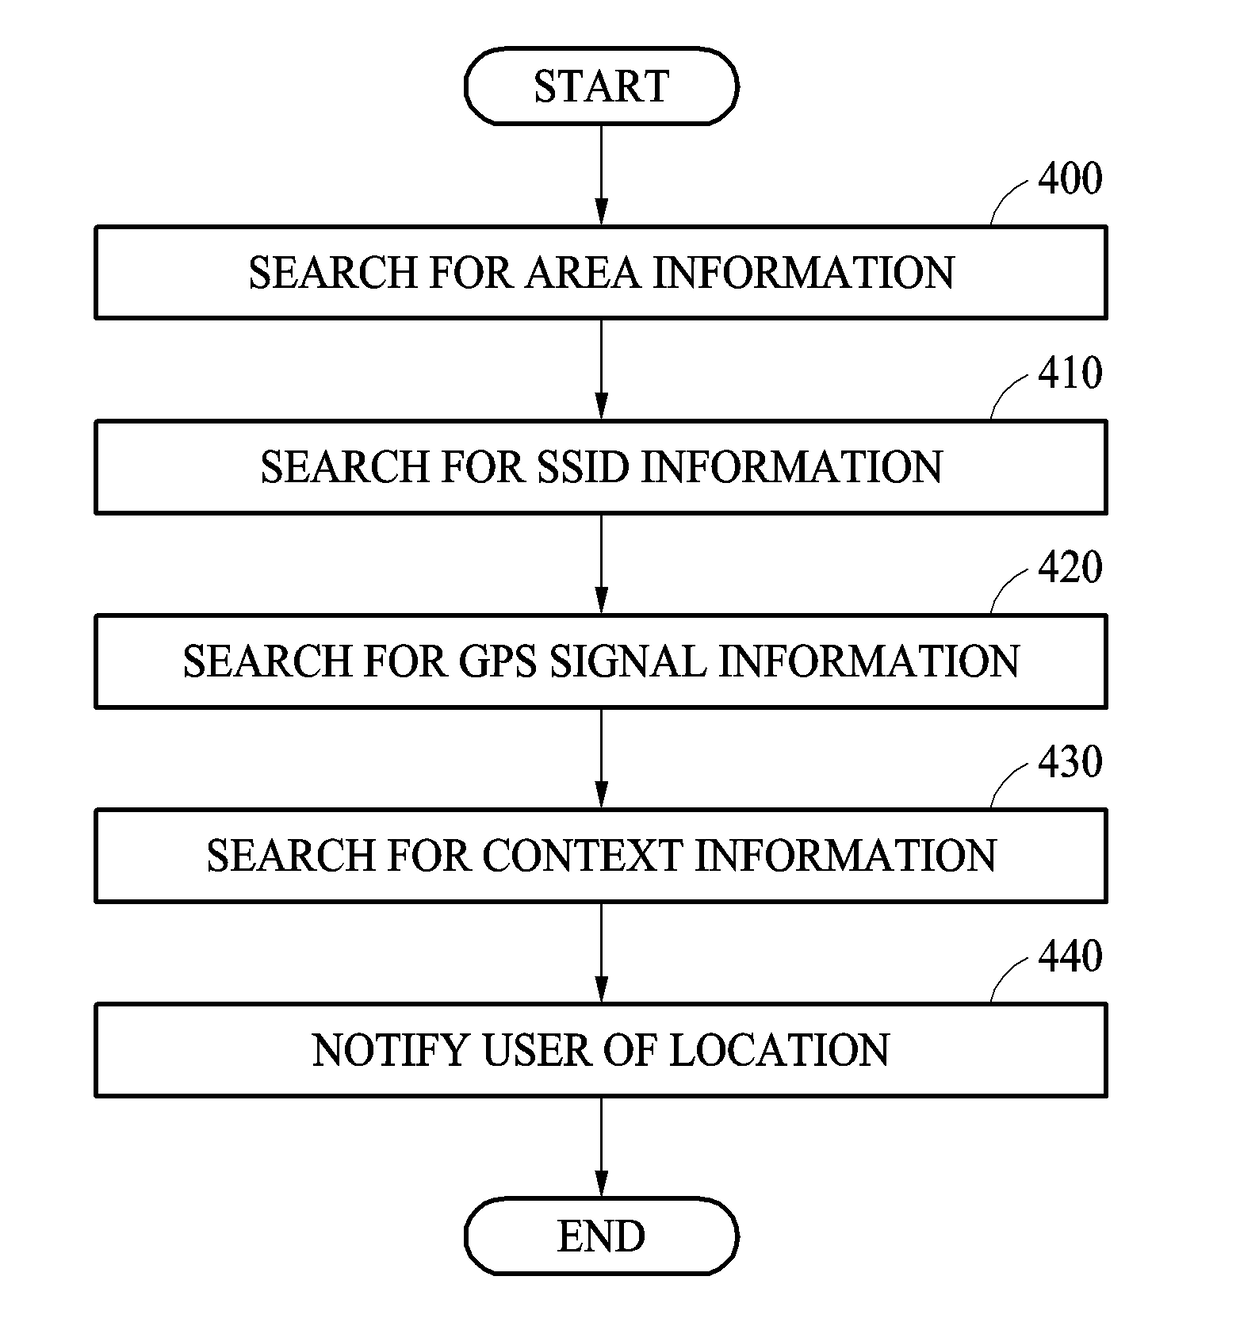 Apparatus for identifying location of user